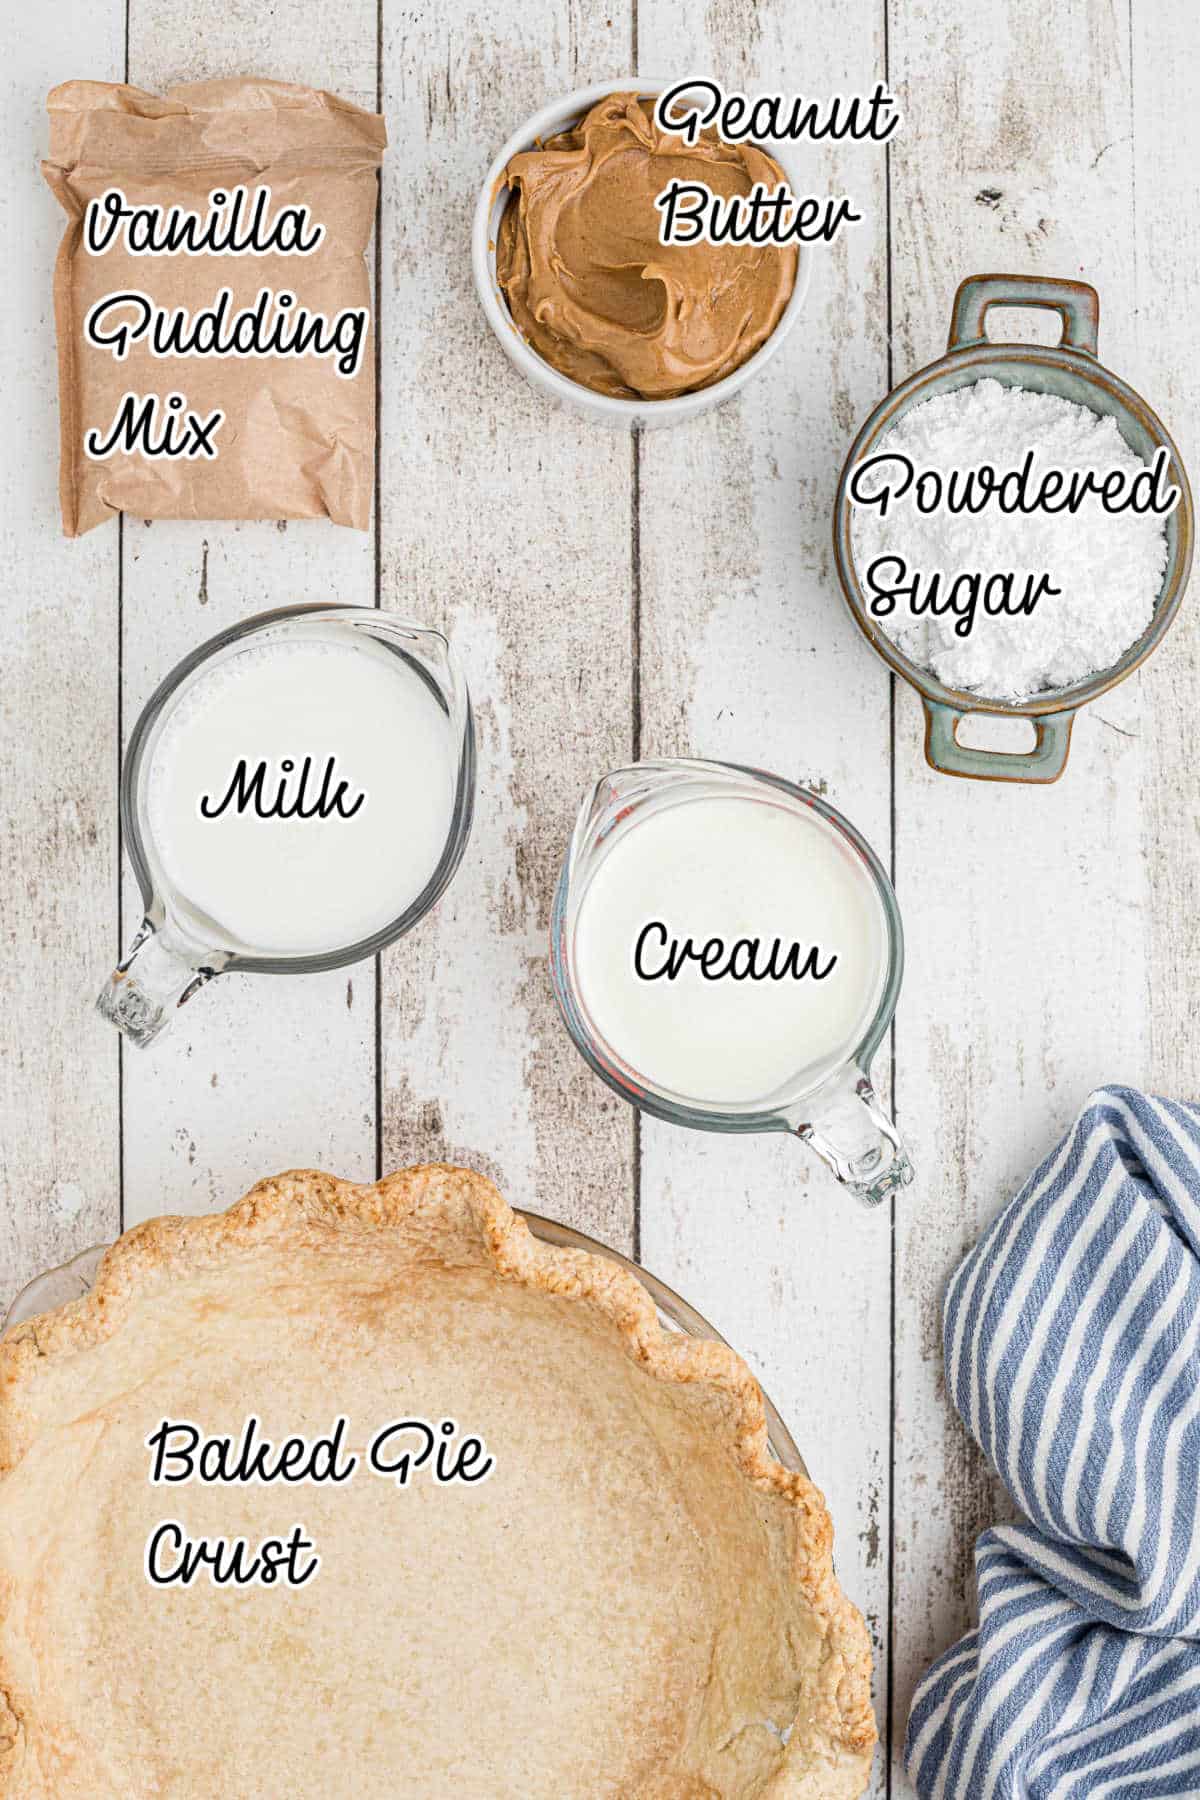 Ingredients needed to make an Amish peanut butter pie with text overlay.